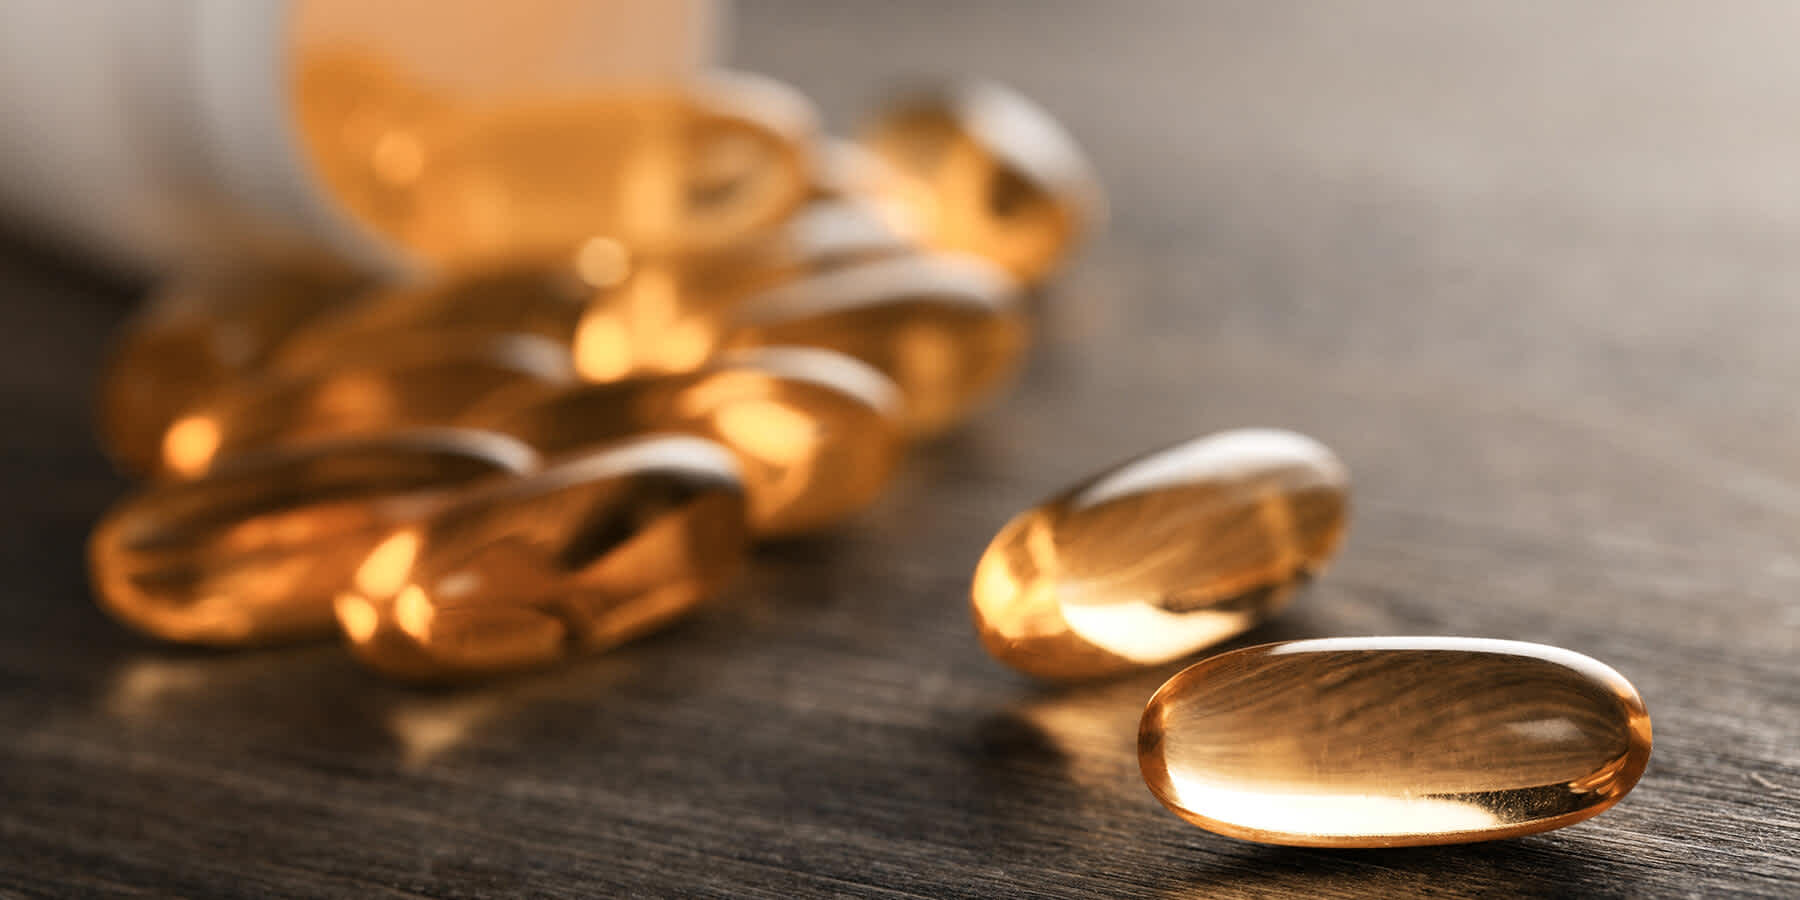 Vitamin D supplements that may help increase testosterone